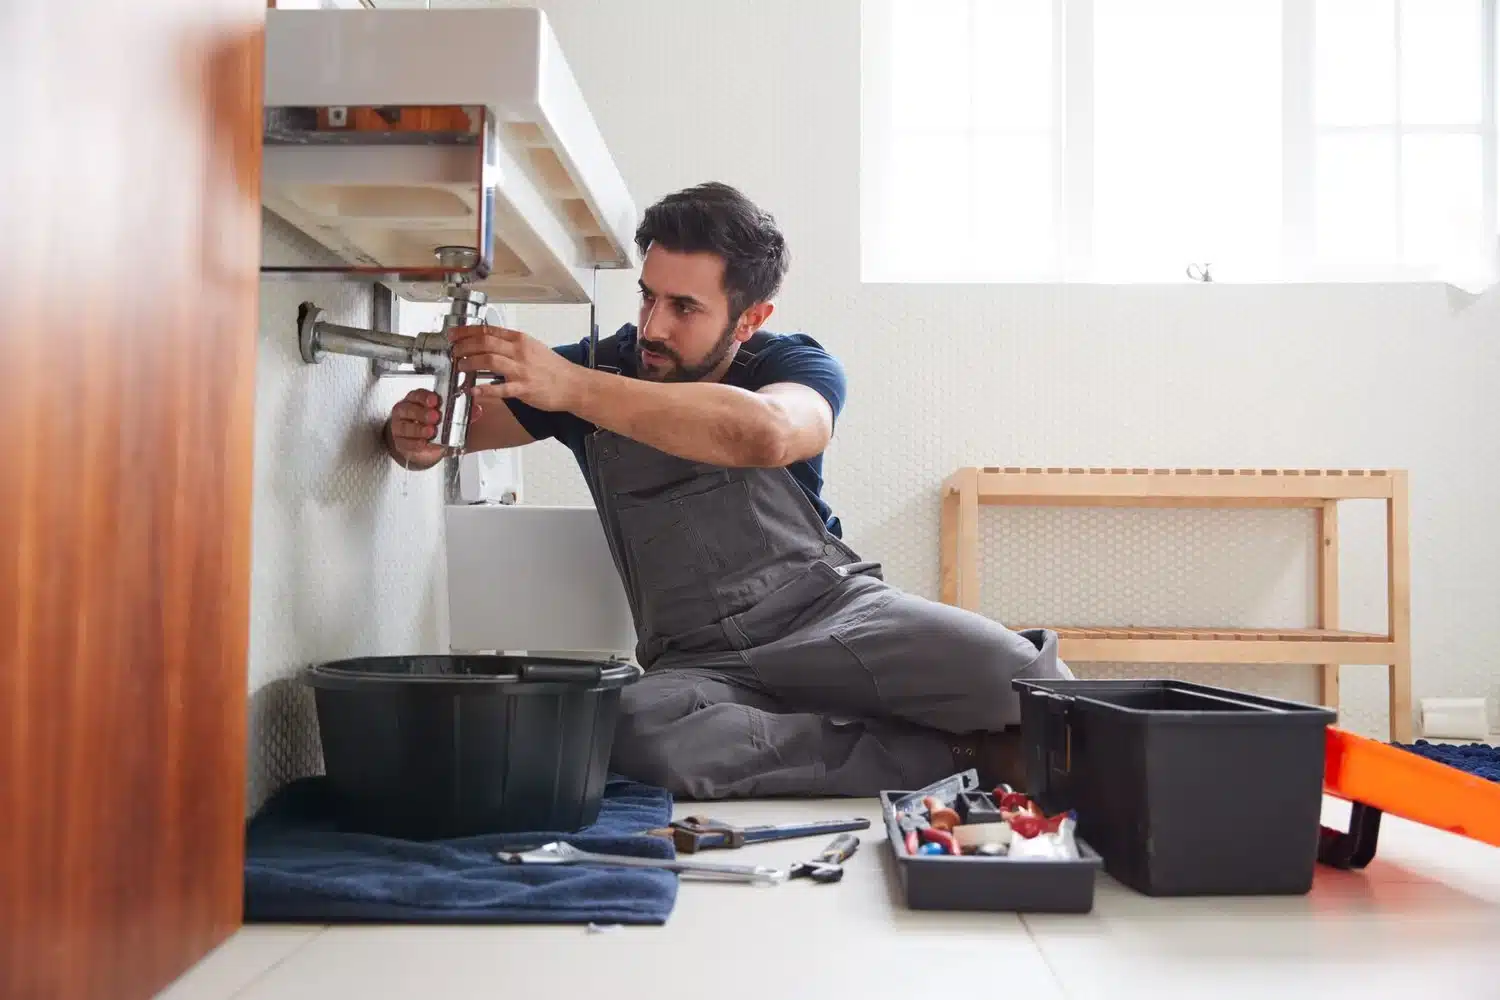 Can You Dodge the High Costs? These Are the Top 6 Home Repairs That Demand Your Wallet's Attention